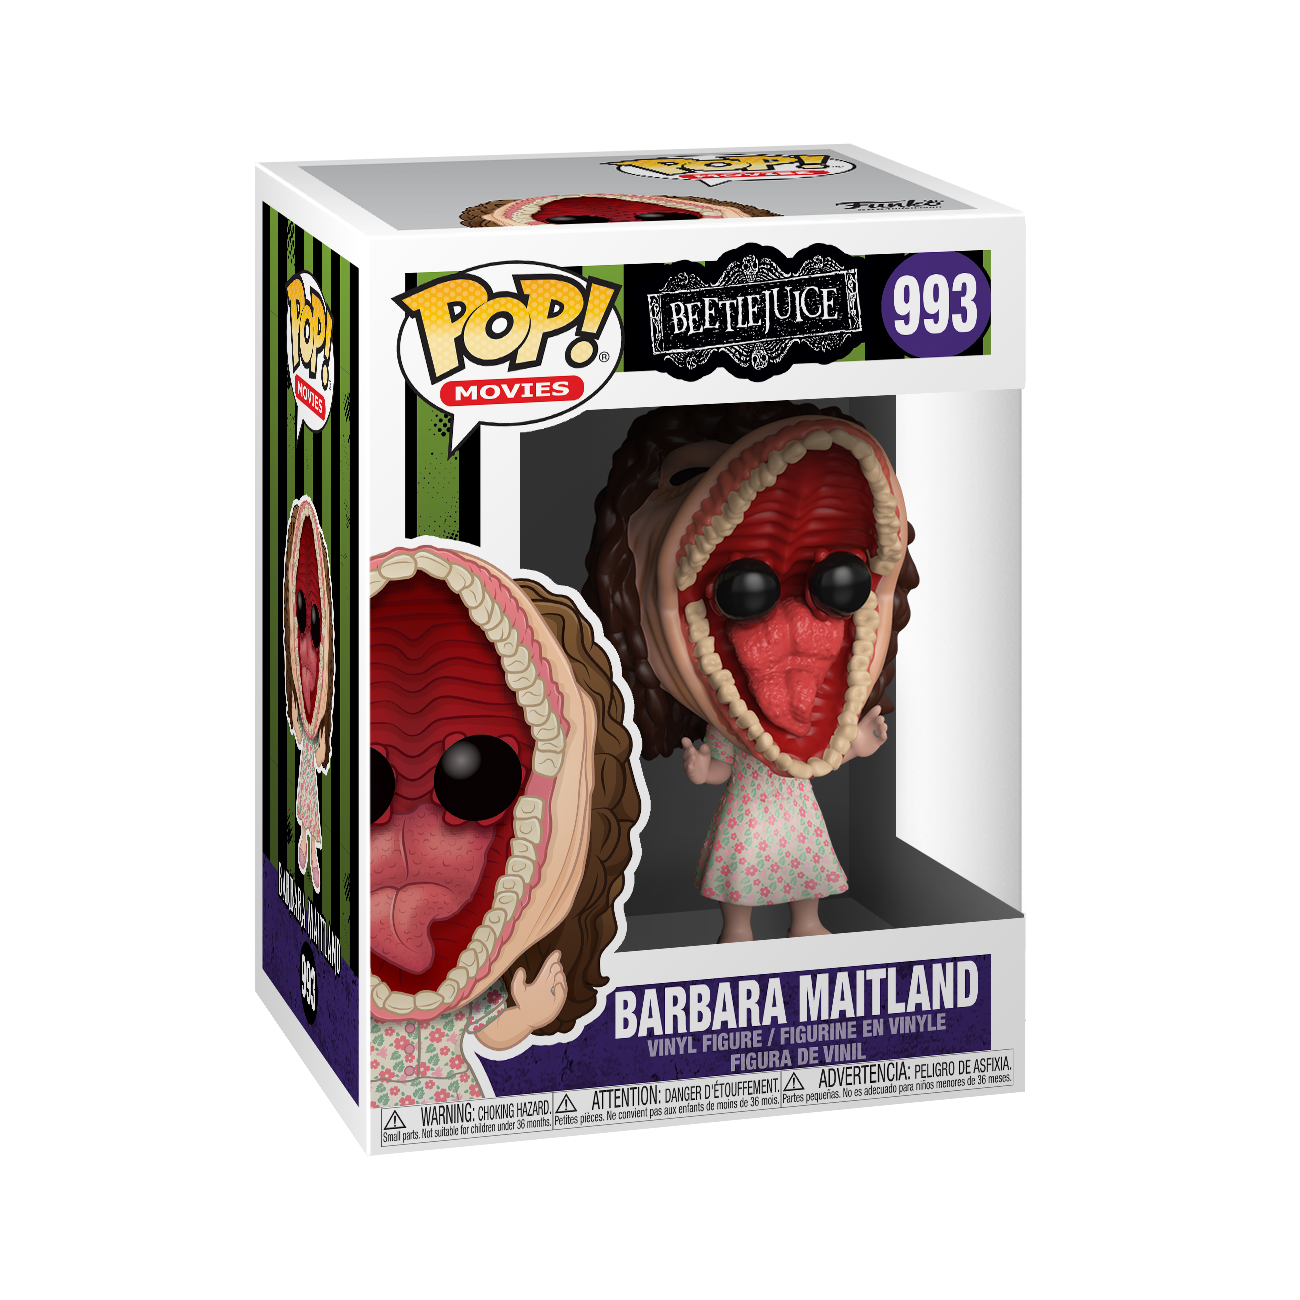 This is a Barbara Maitland Beetlejuice Funko Pop and she has pink shoes, pink dress with flowers, brown hair, black eyes and he mouth is open showing her teeth and tongue in box.